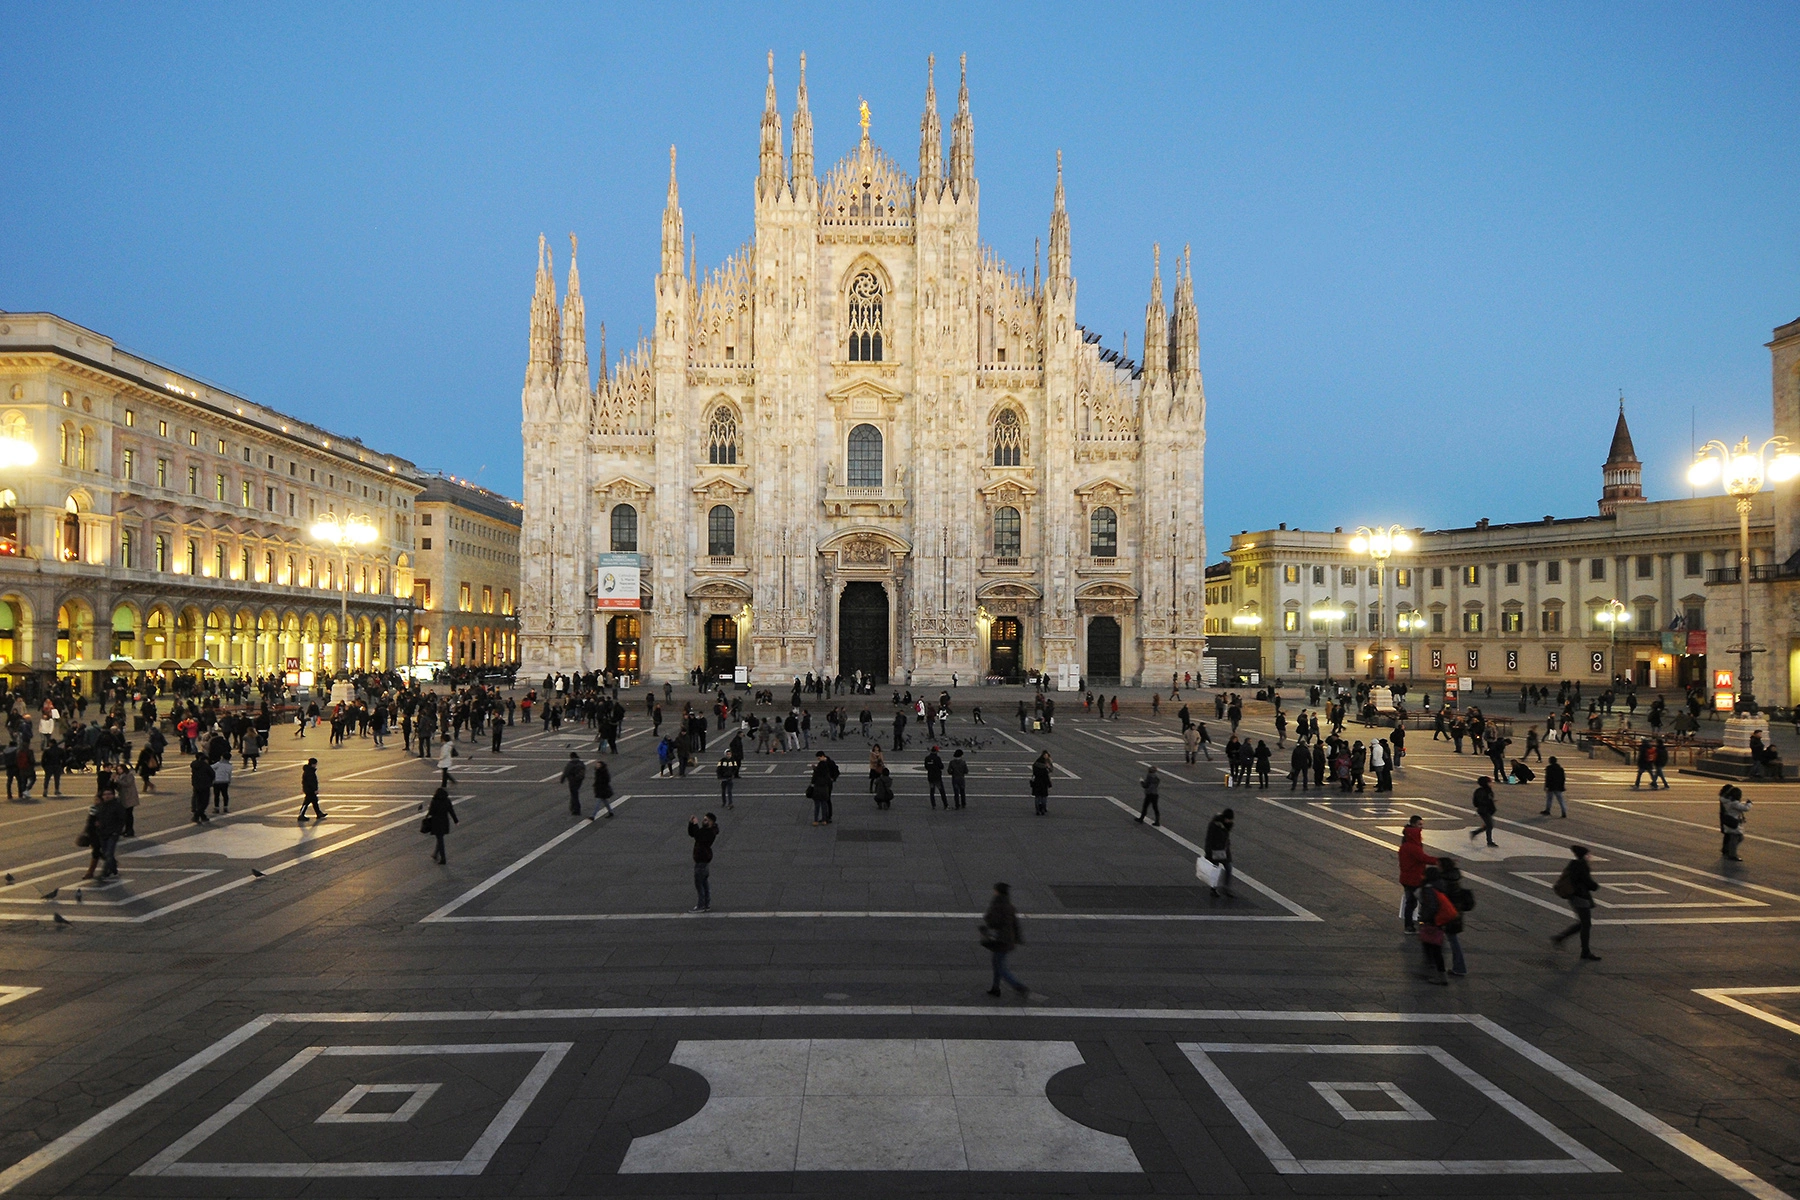 Duomo di Milano, a gothic cathedral in Milan with a busy square in front of it